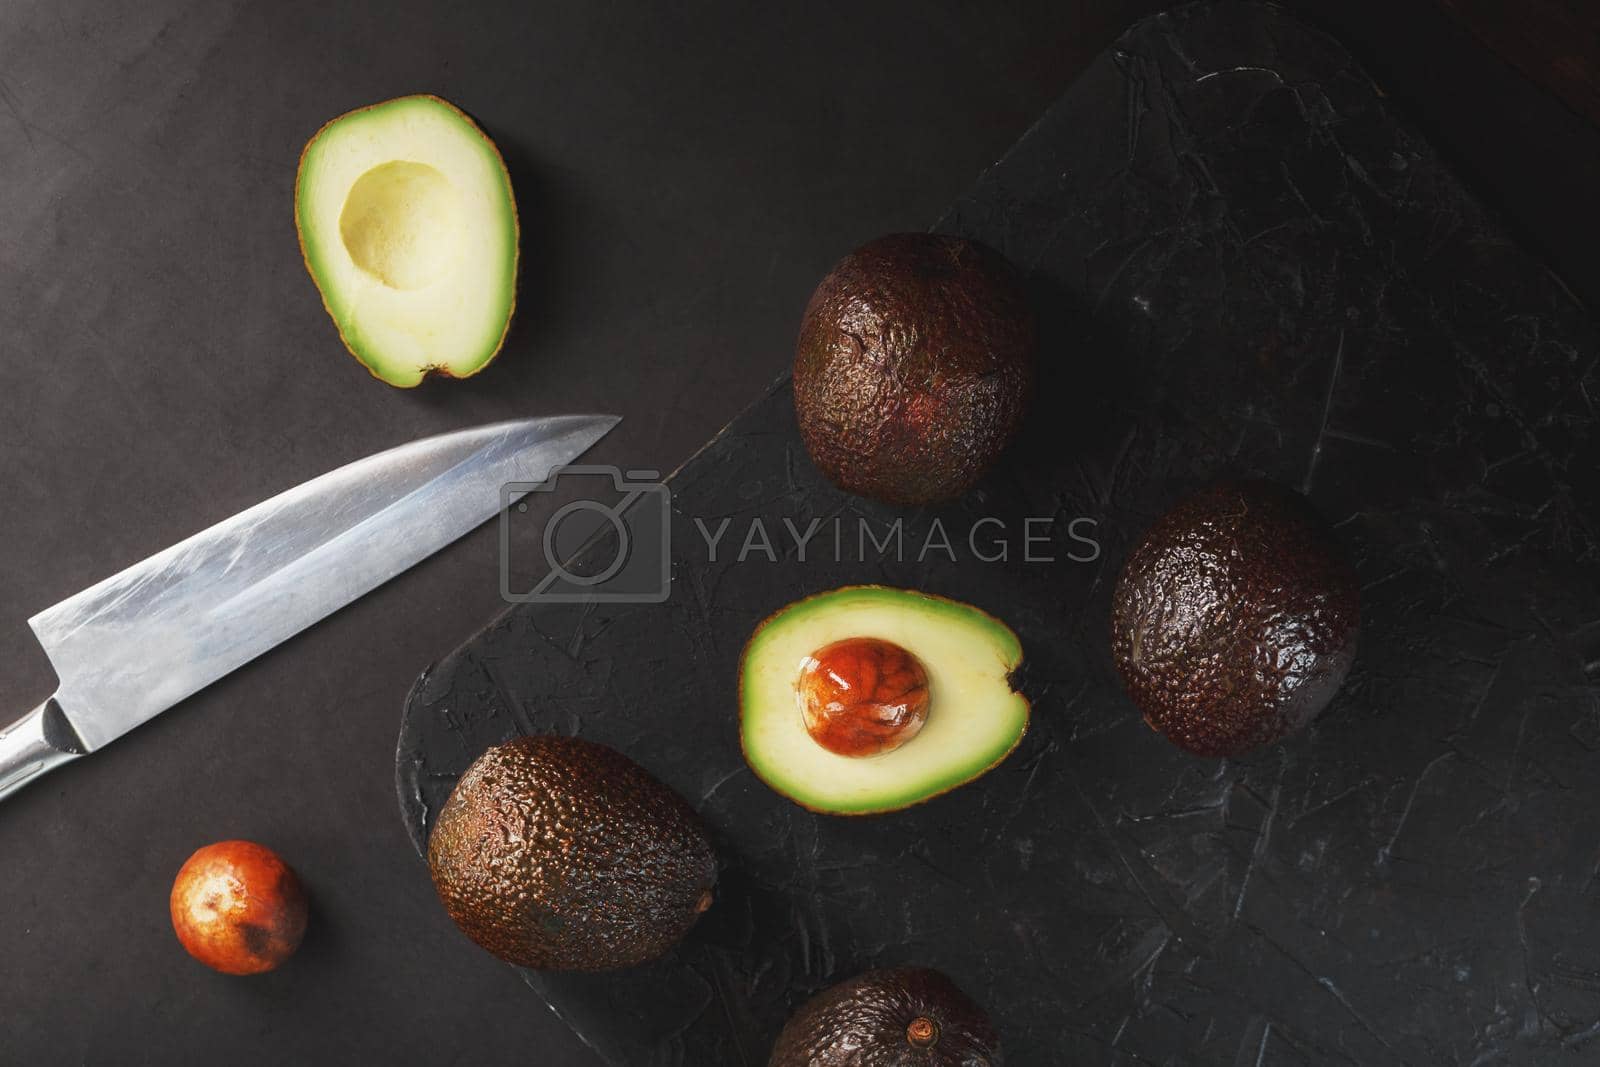 Royalty free image of Sliced and whole organic avocado Hass with a knife on a black background. by AlexGrec